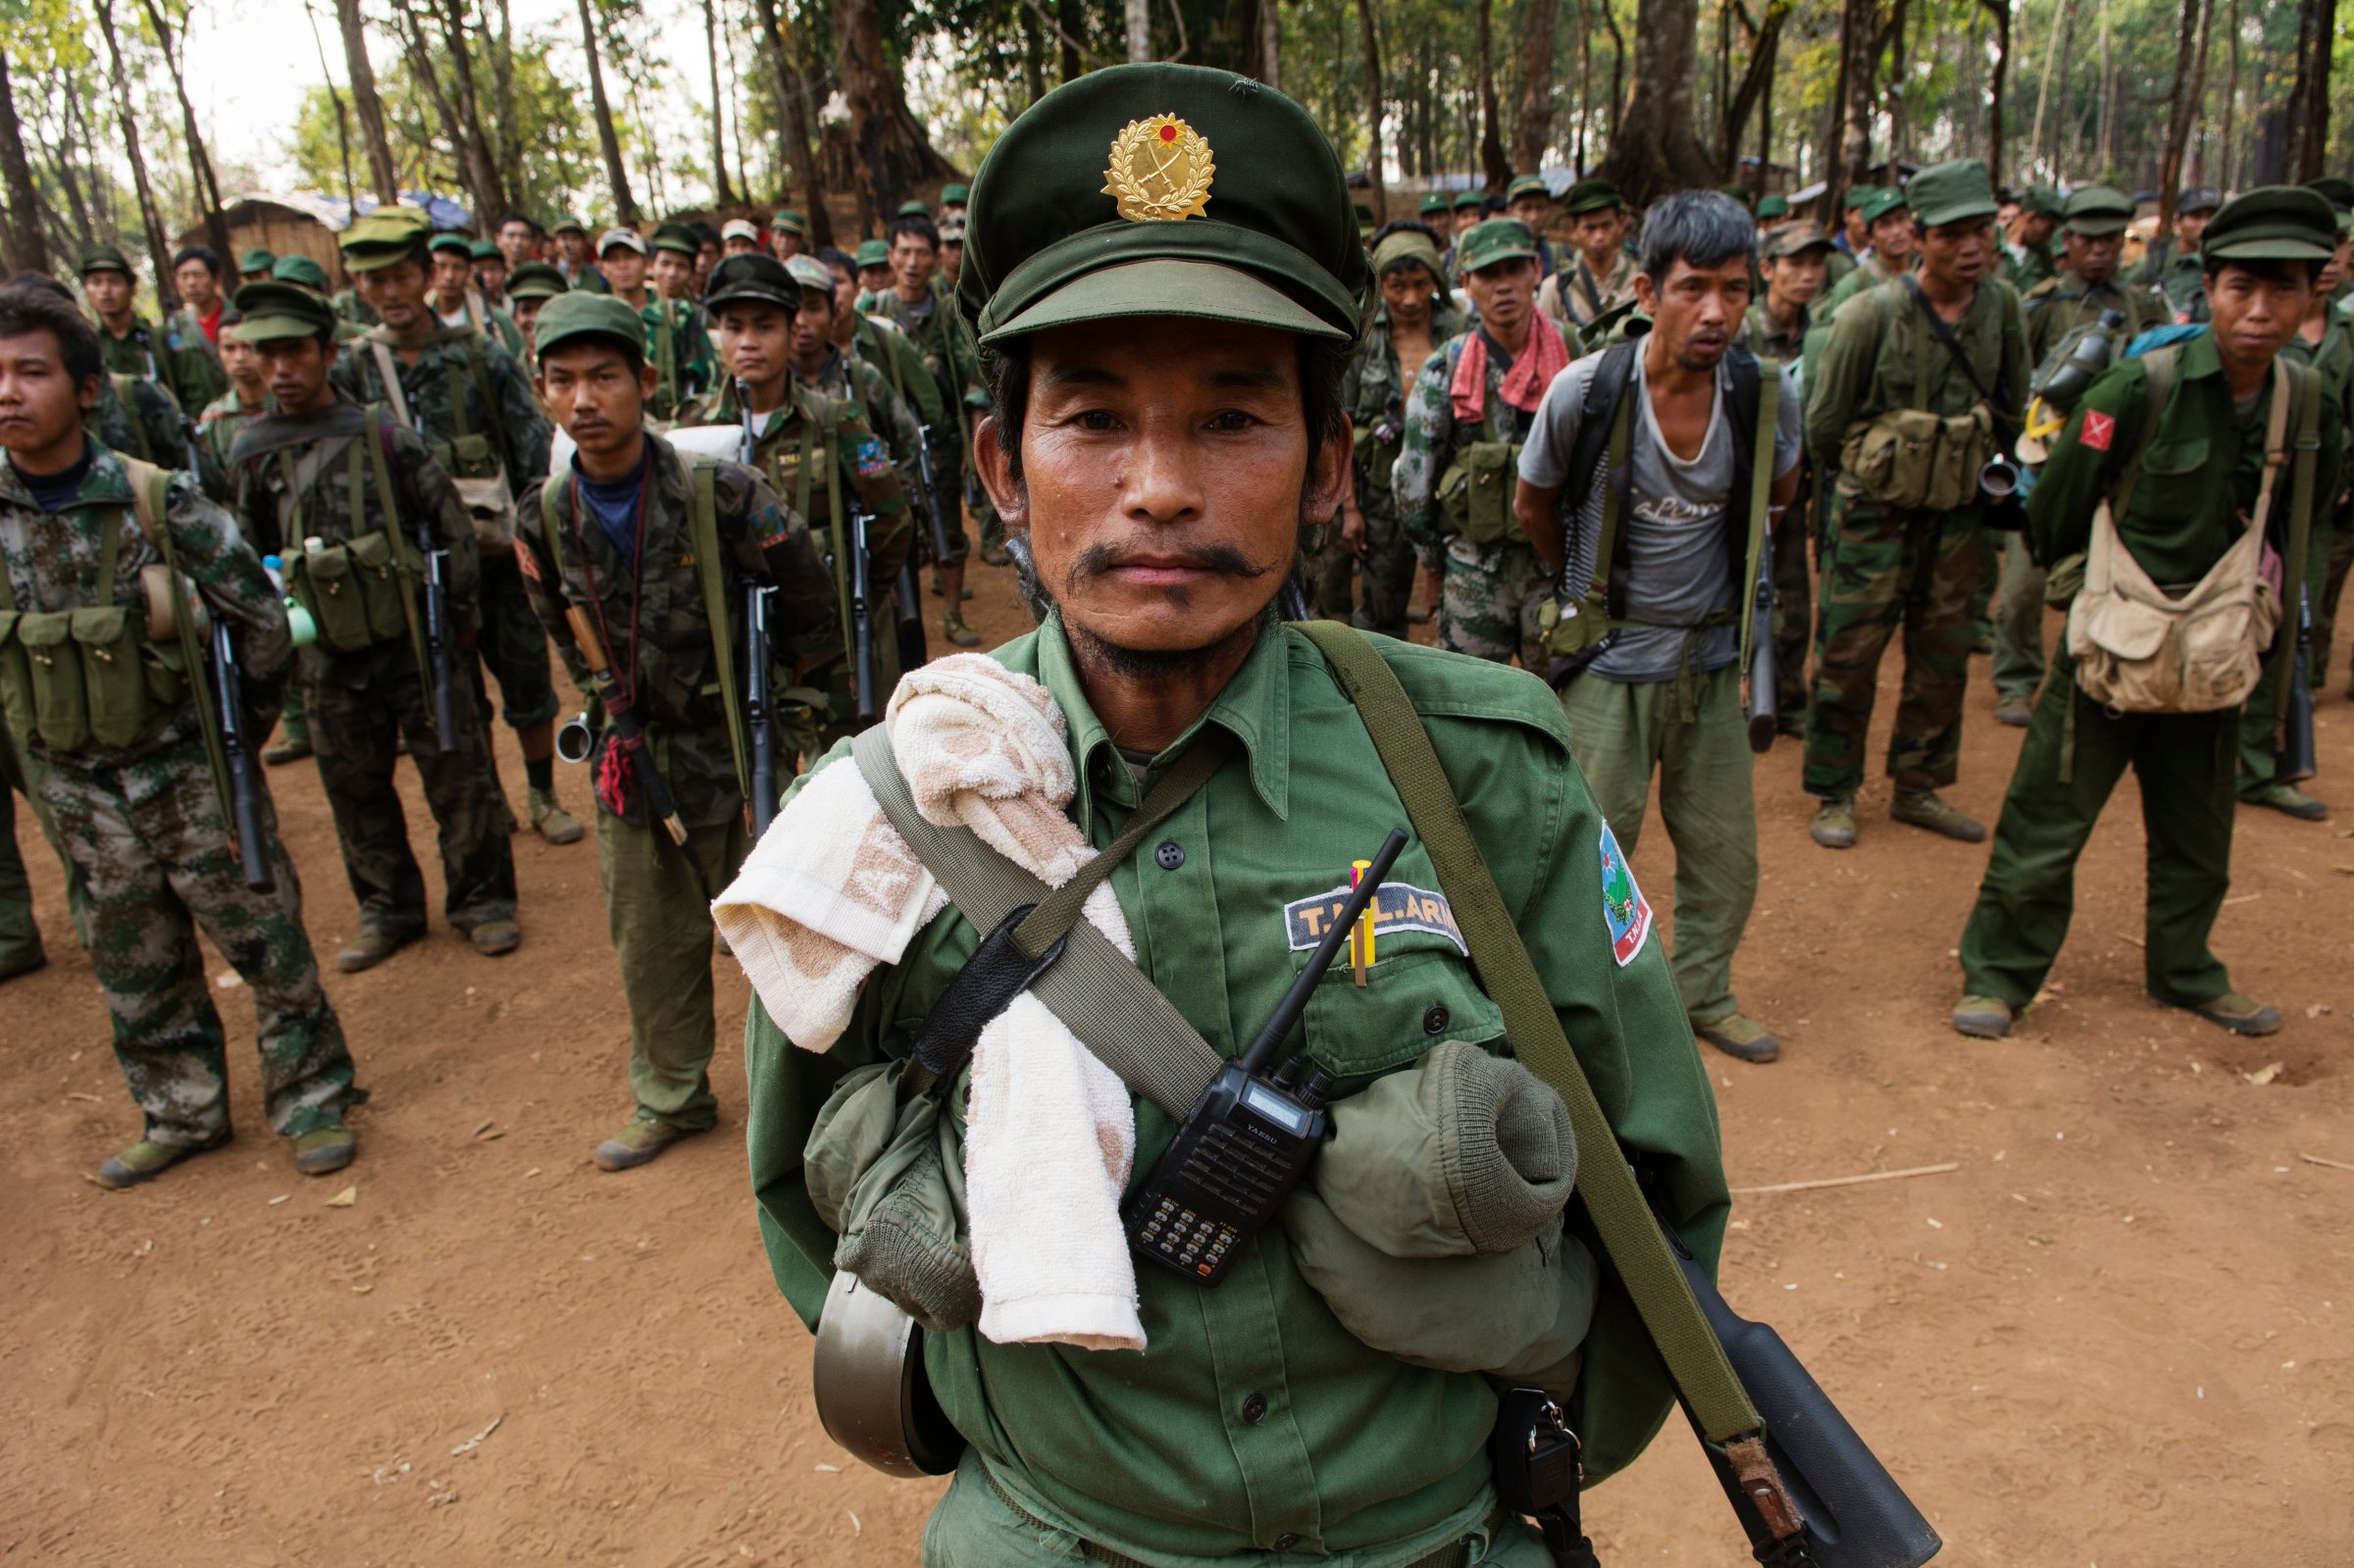 SHAN STATE, MYANMAR - 2014/03/12: An officer from the TNLA (Ta'ang National Liberation Army, Ta'ang is another word for Palaung) stands at attention with his soldiers during a morning gathering in a military camp.The TNLA, created in 2009, claims about 1,500 soldiers and another 1,500 trained villagers. Alongside with other ethnic groups, the TNLA fights the government troops in order to get some kind of autonomy within a federal system for the Palaung populated area in north-west Shan State. (Photo by Thierry Falise/LightRocket via Getty Images)